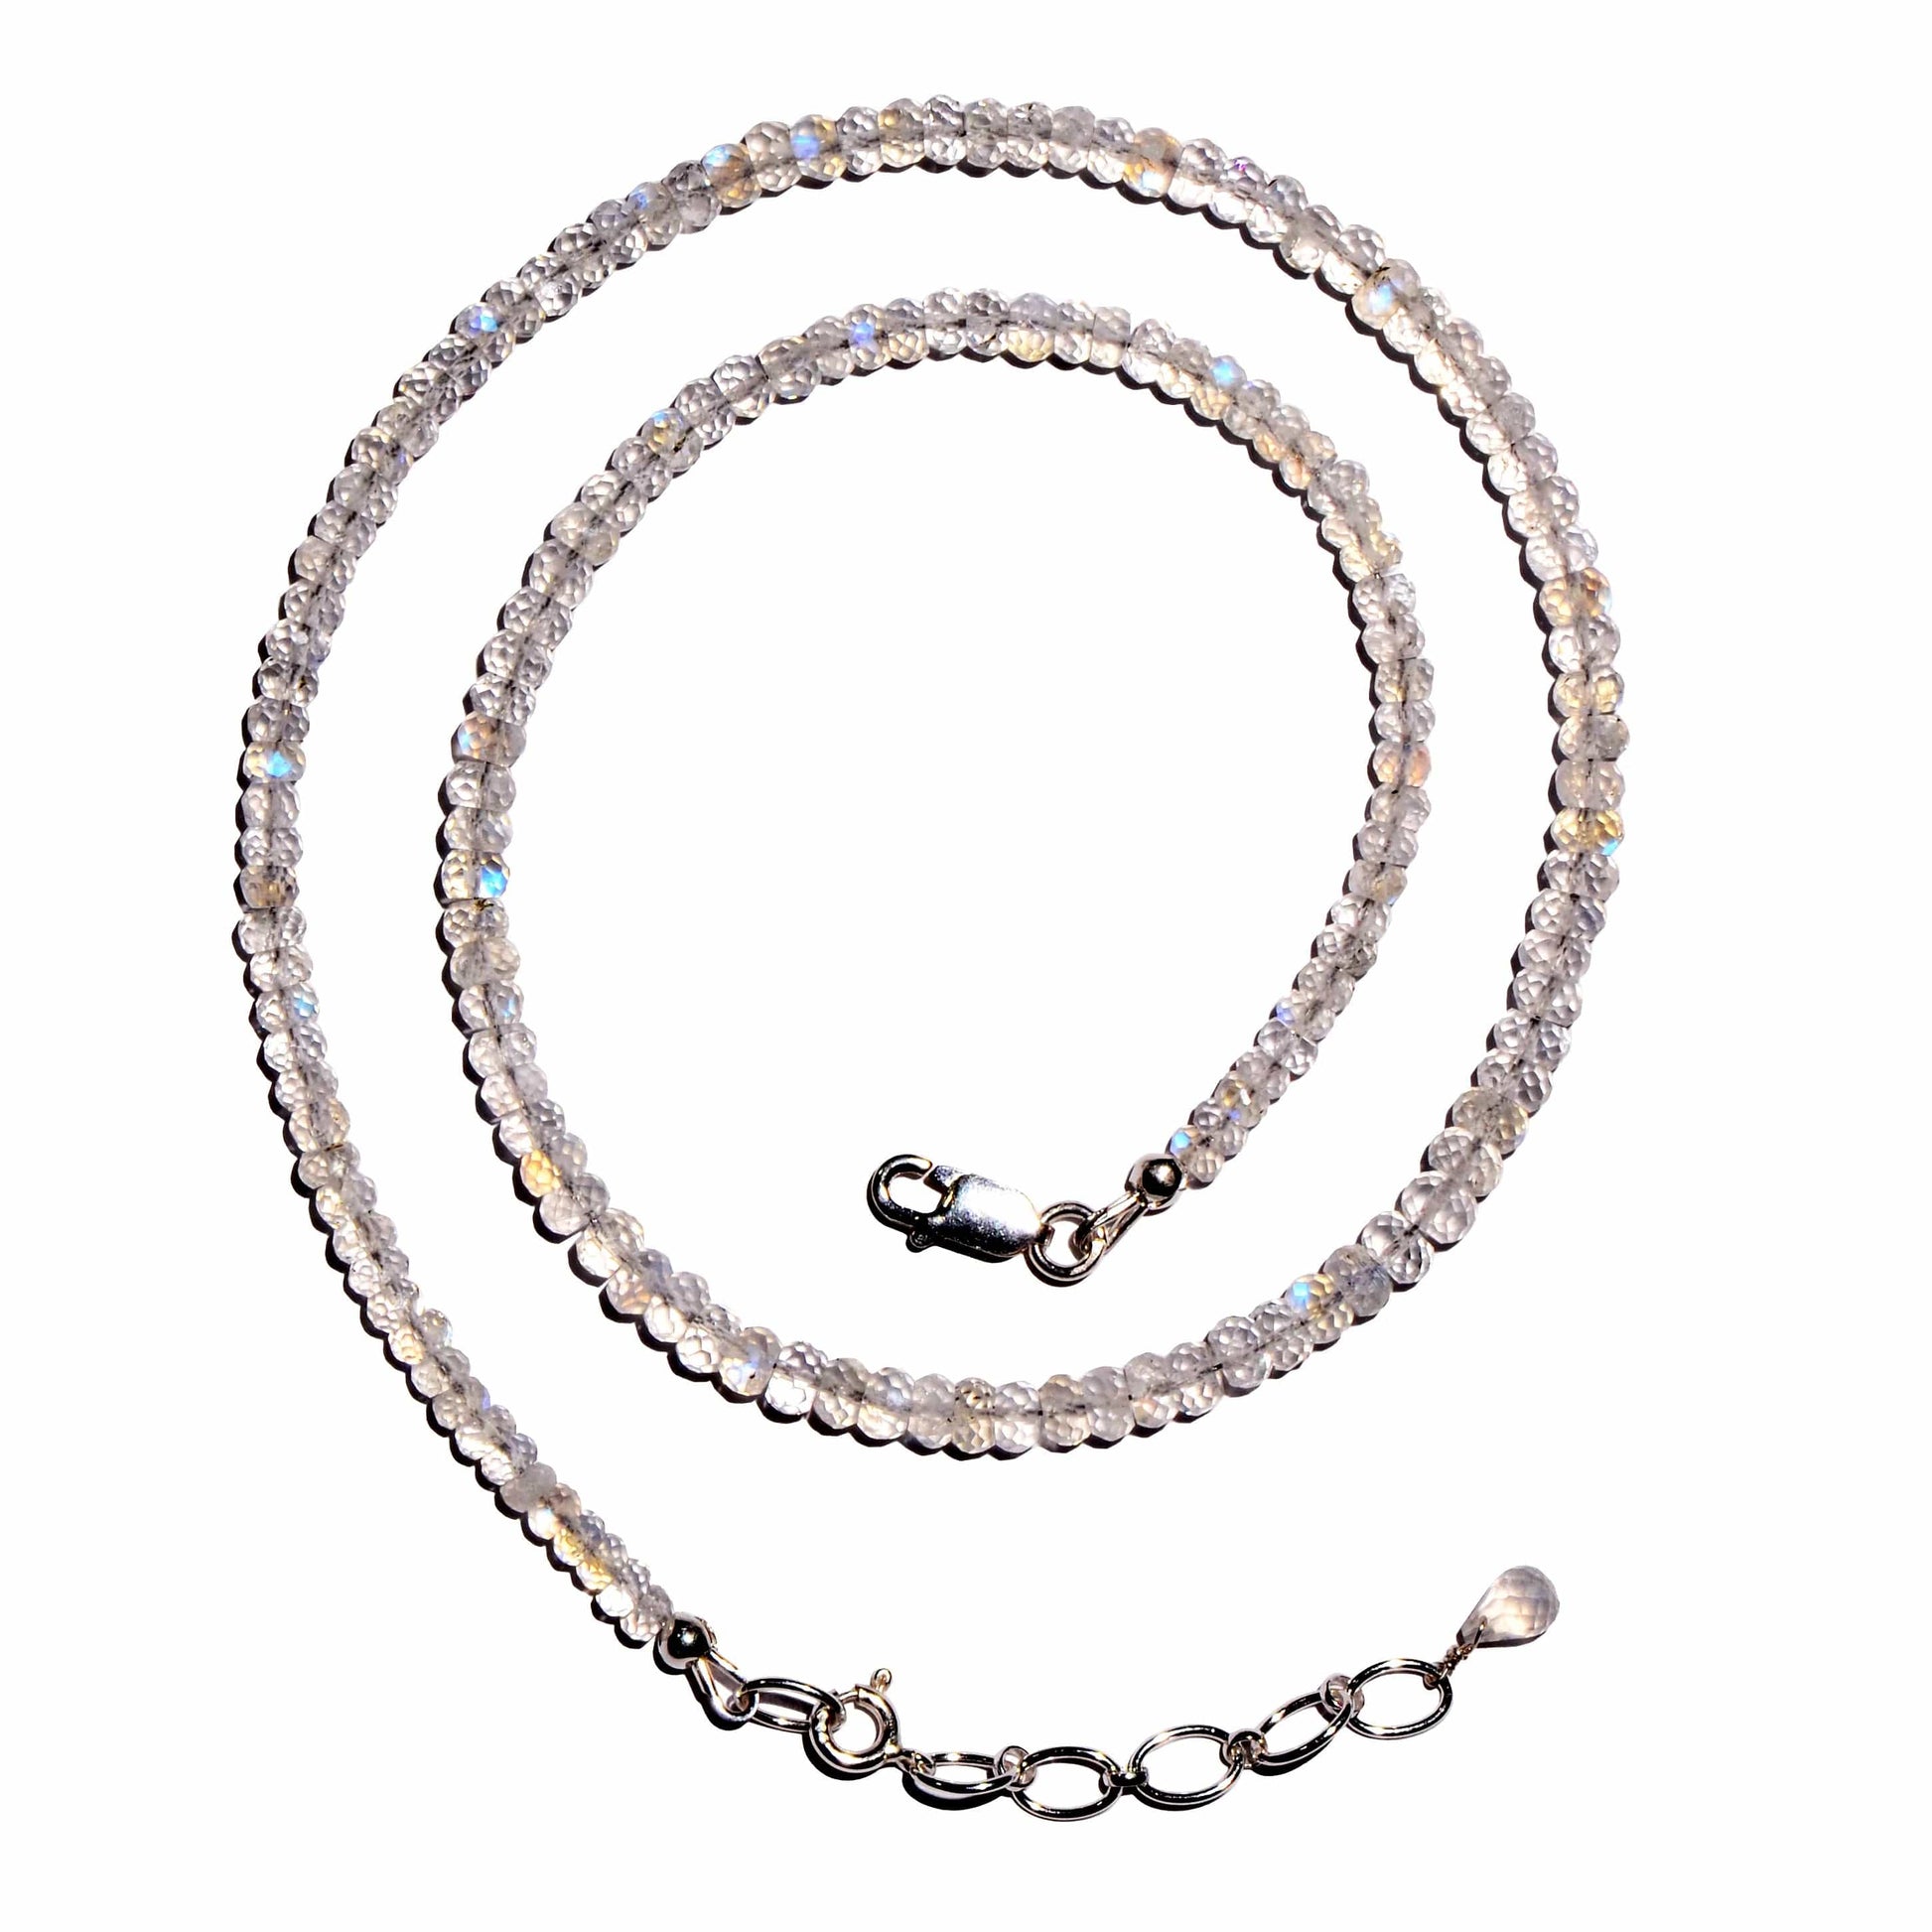 Buy Rainbow Moonstone Faceted Microbead Necklace 4mm for the goddess stone.